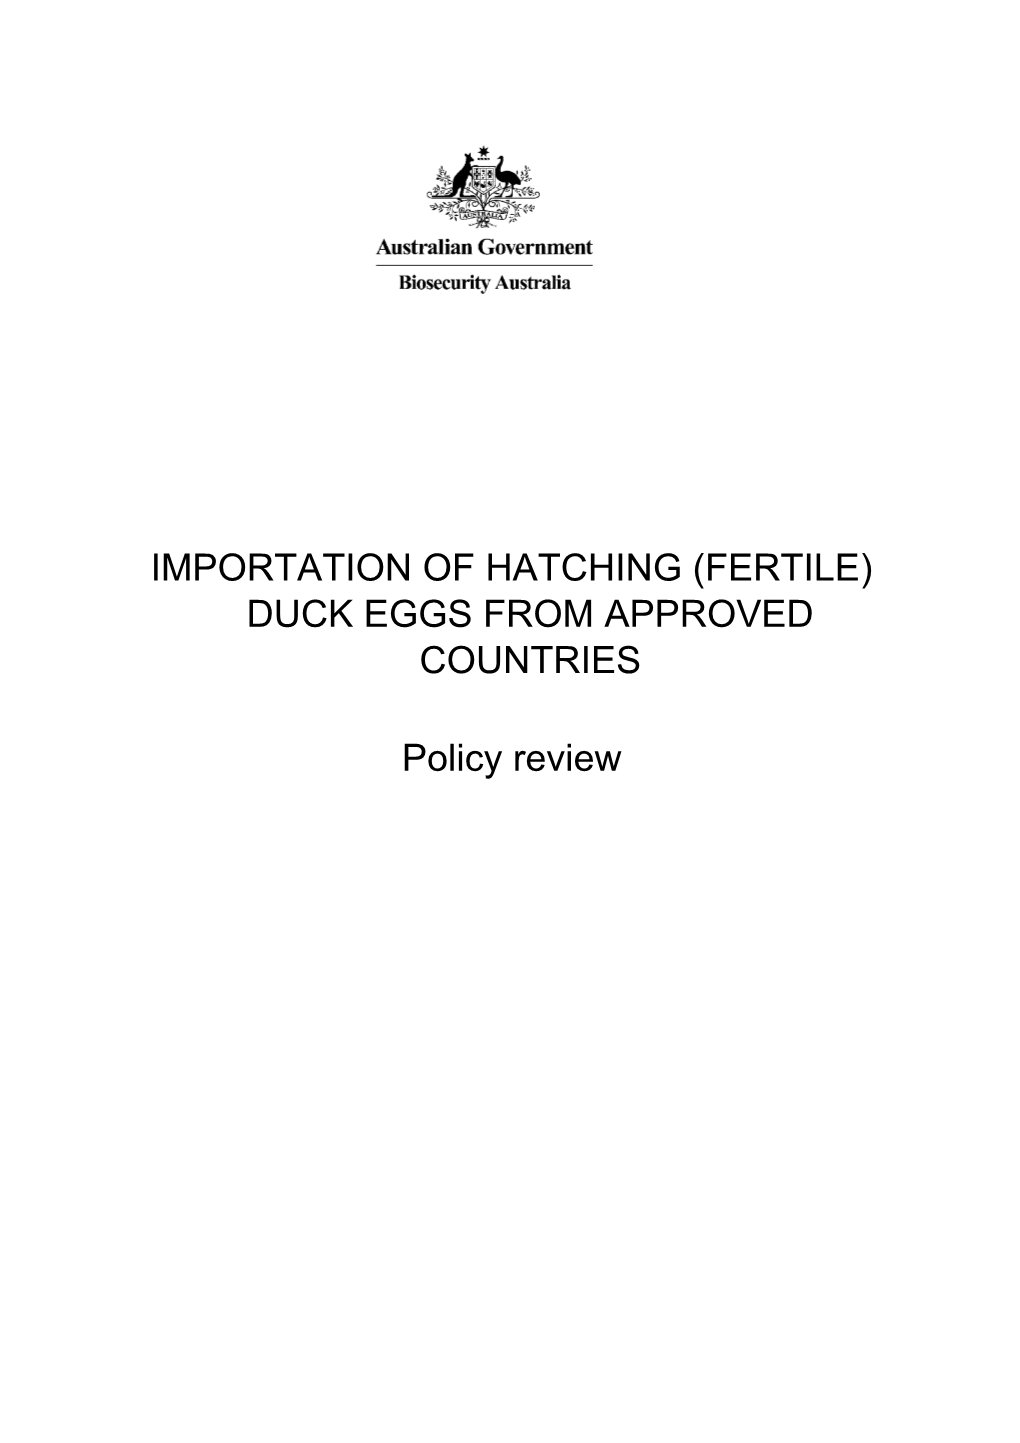 Importation of Hatching (Fertile) Duck Eggs from Approved Countries